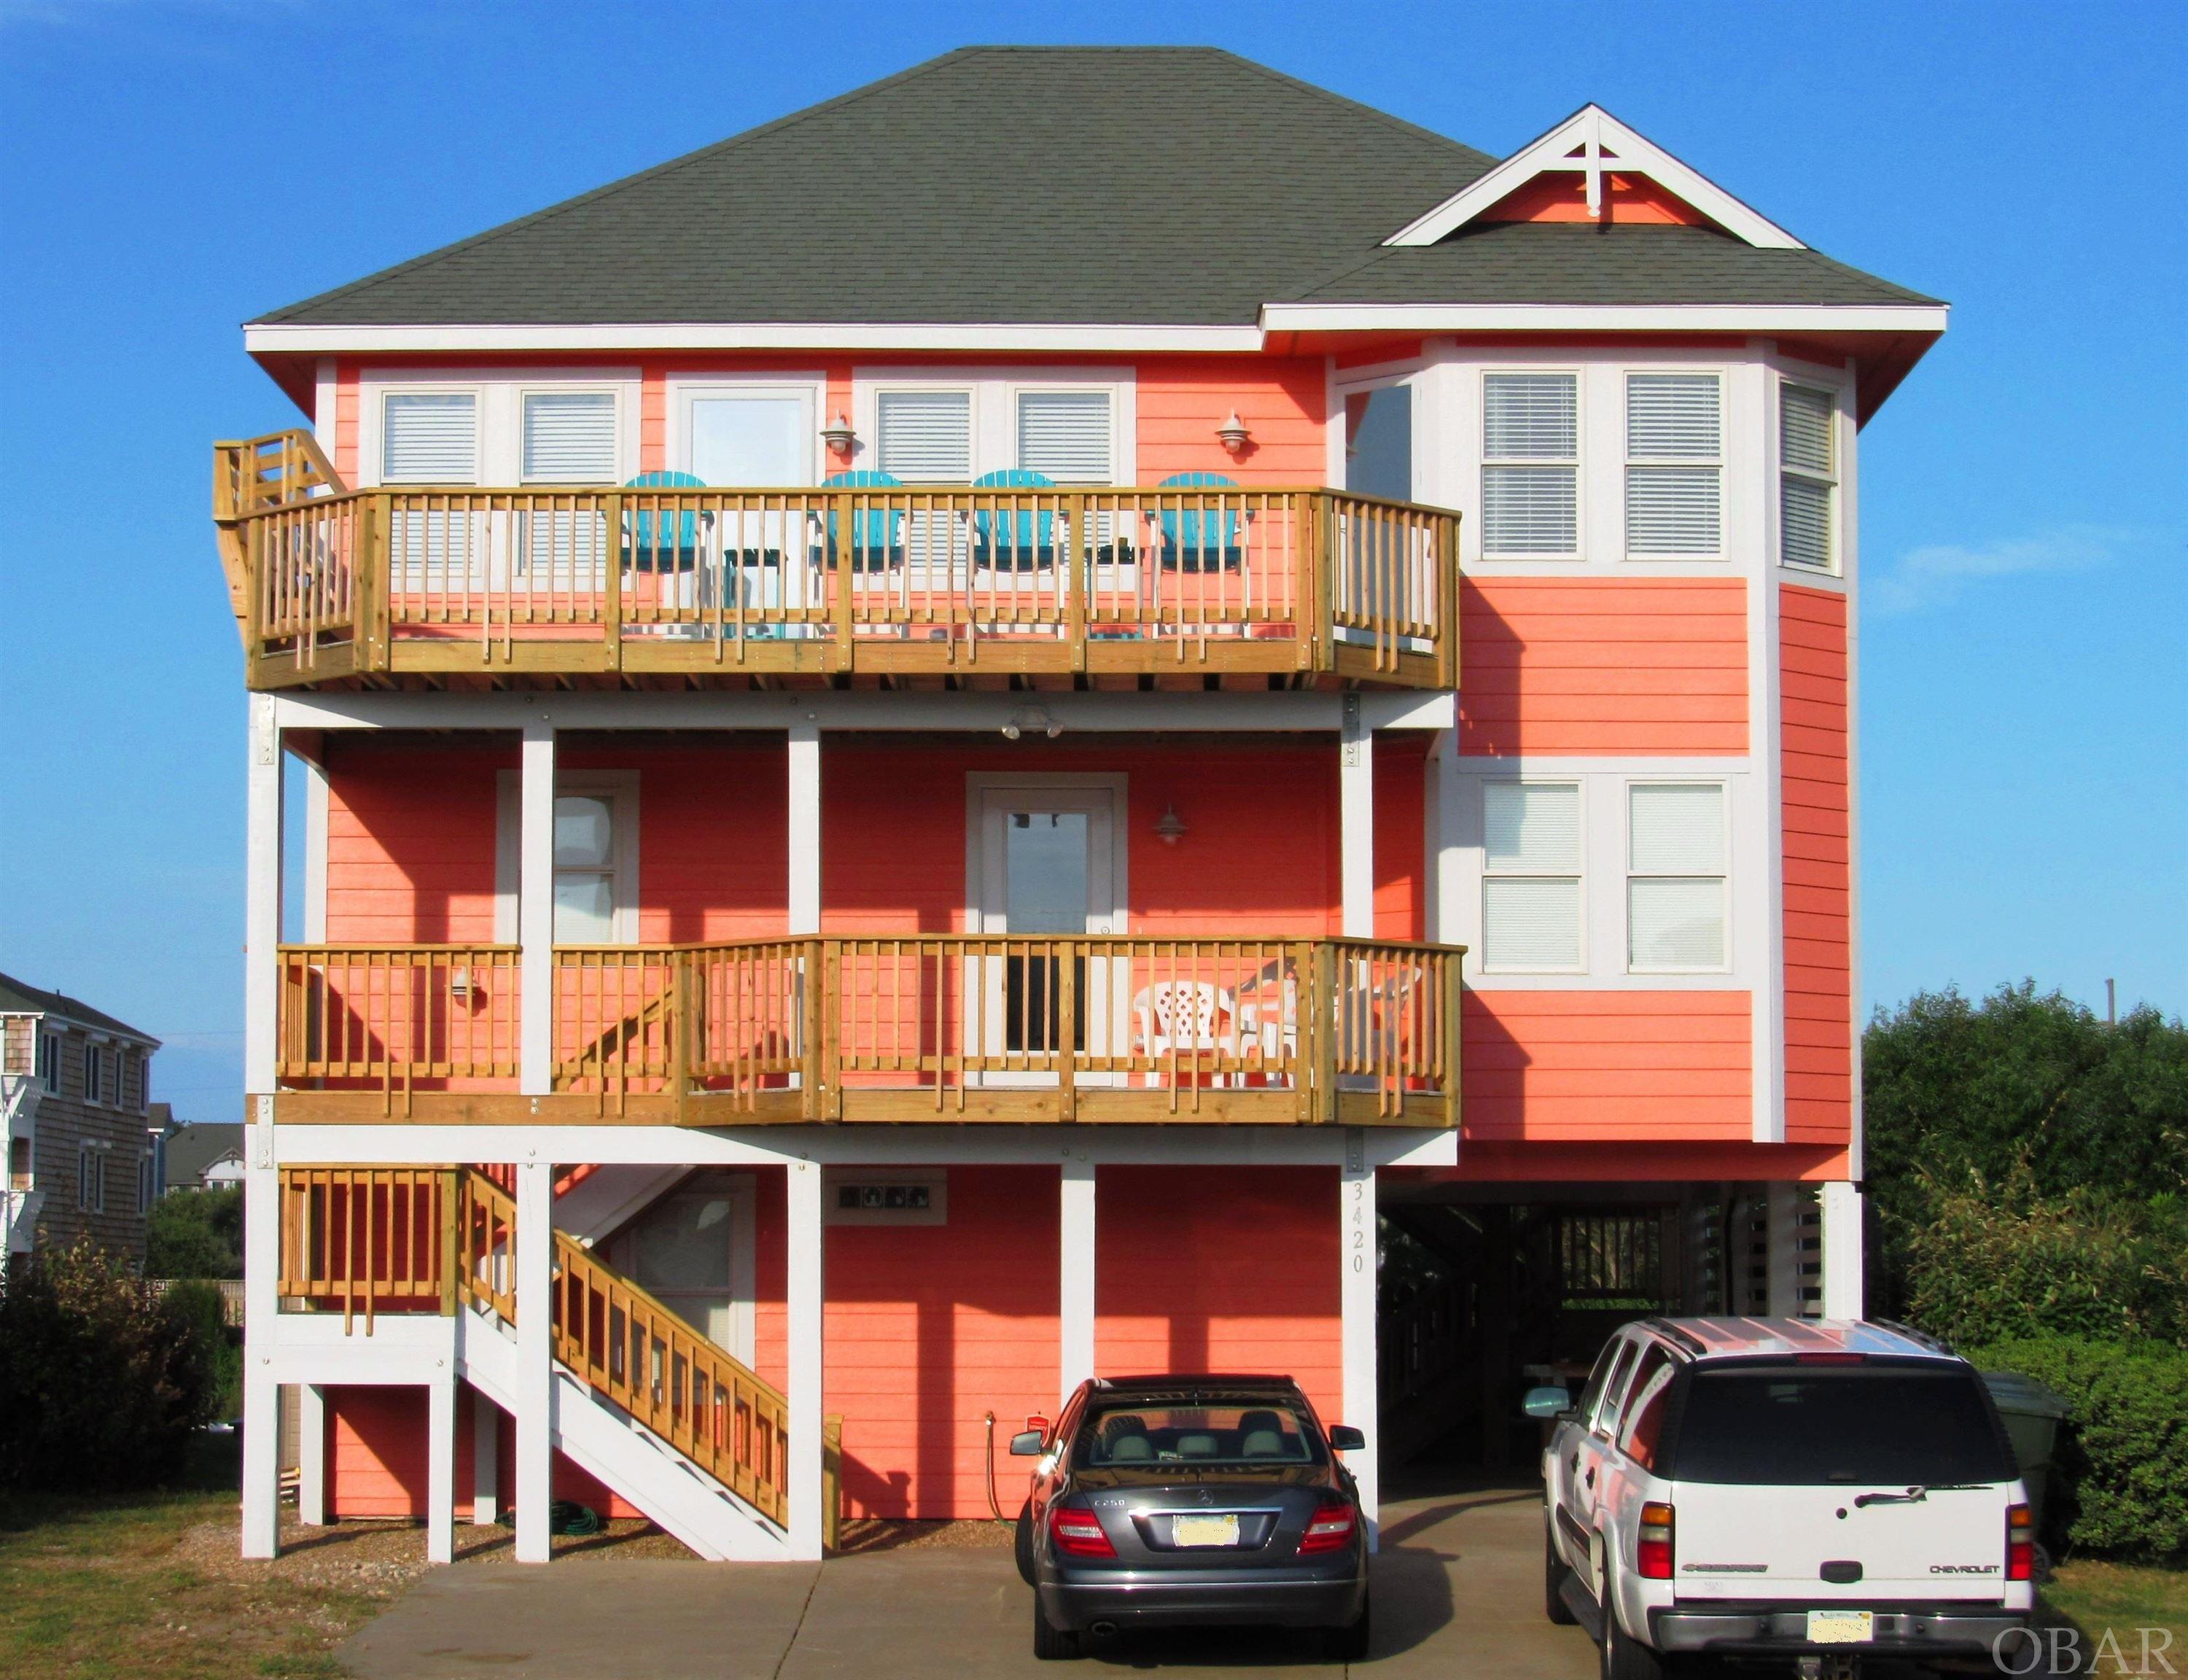 This Semi-Oceanfront home in Nags Head is Just South of the Nags Head Fishing Pier. Beautiful Ocean Views from the spacious Top Level Deck! Deeded Private Beach Access plus Public Beach Access. This Beautiful Home has 5 bedrooms and 4 full baths. The ground floor has a Game Room with pool table and sitting area with 1 bedroom and 1 bathroom. The Mid Level Floor has 3 bedrooms and 2 full baths with a den, laundry closet, and wet bar and has direct access to both the front and rear mid-level decks. The Top Floor has a large living room, huge dining area, and a spacious kitchen. Also on the Top Floor is the master bedroom with its own full bathroom. The private pool, hot tub and recently upgraded front and rear decks maximize outdoor enjoyment of the home. This standout semi-oceanfront home is a gem! Sold fully furnished.